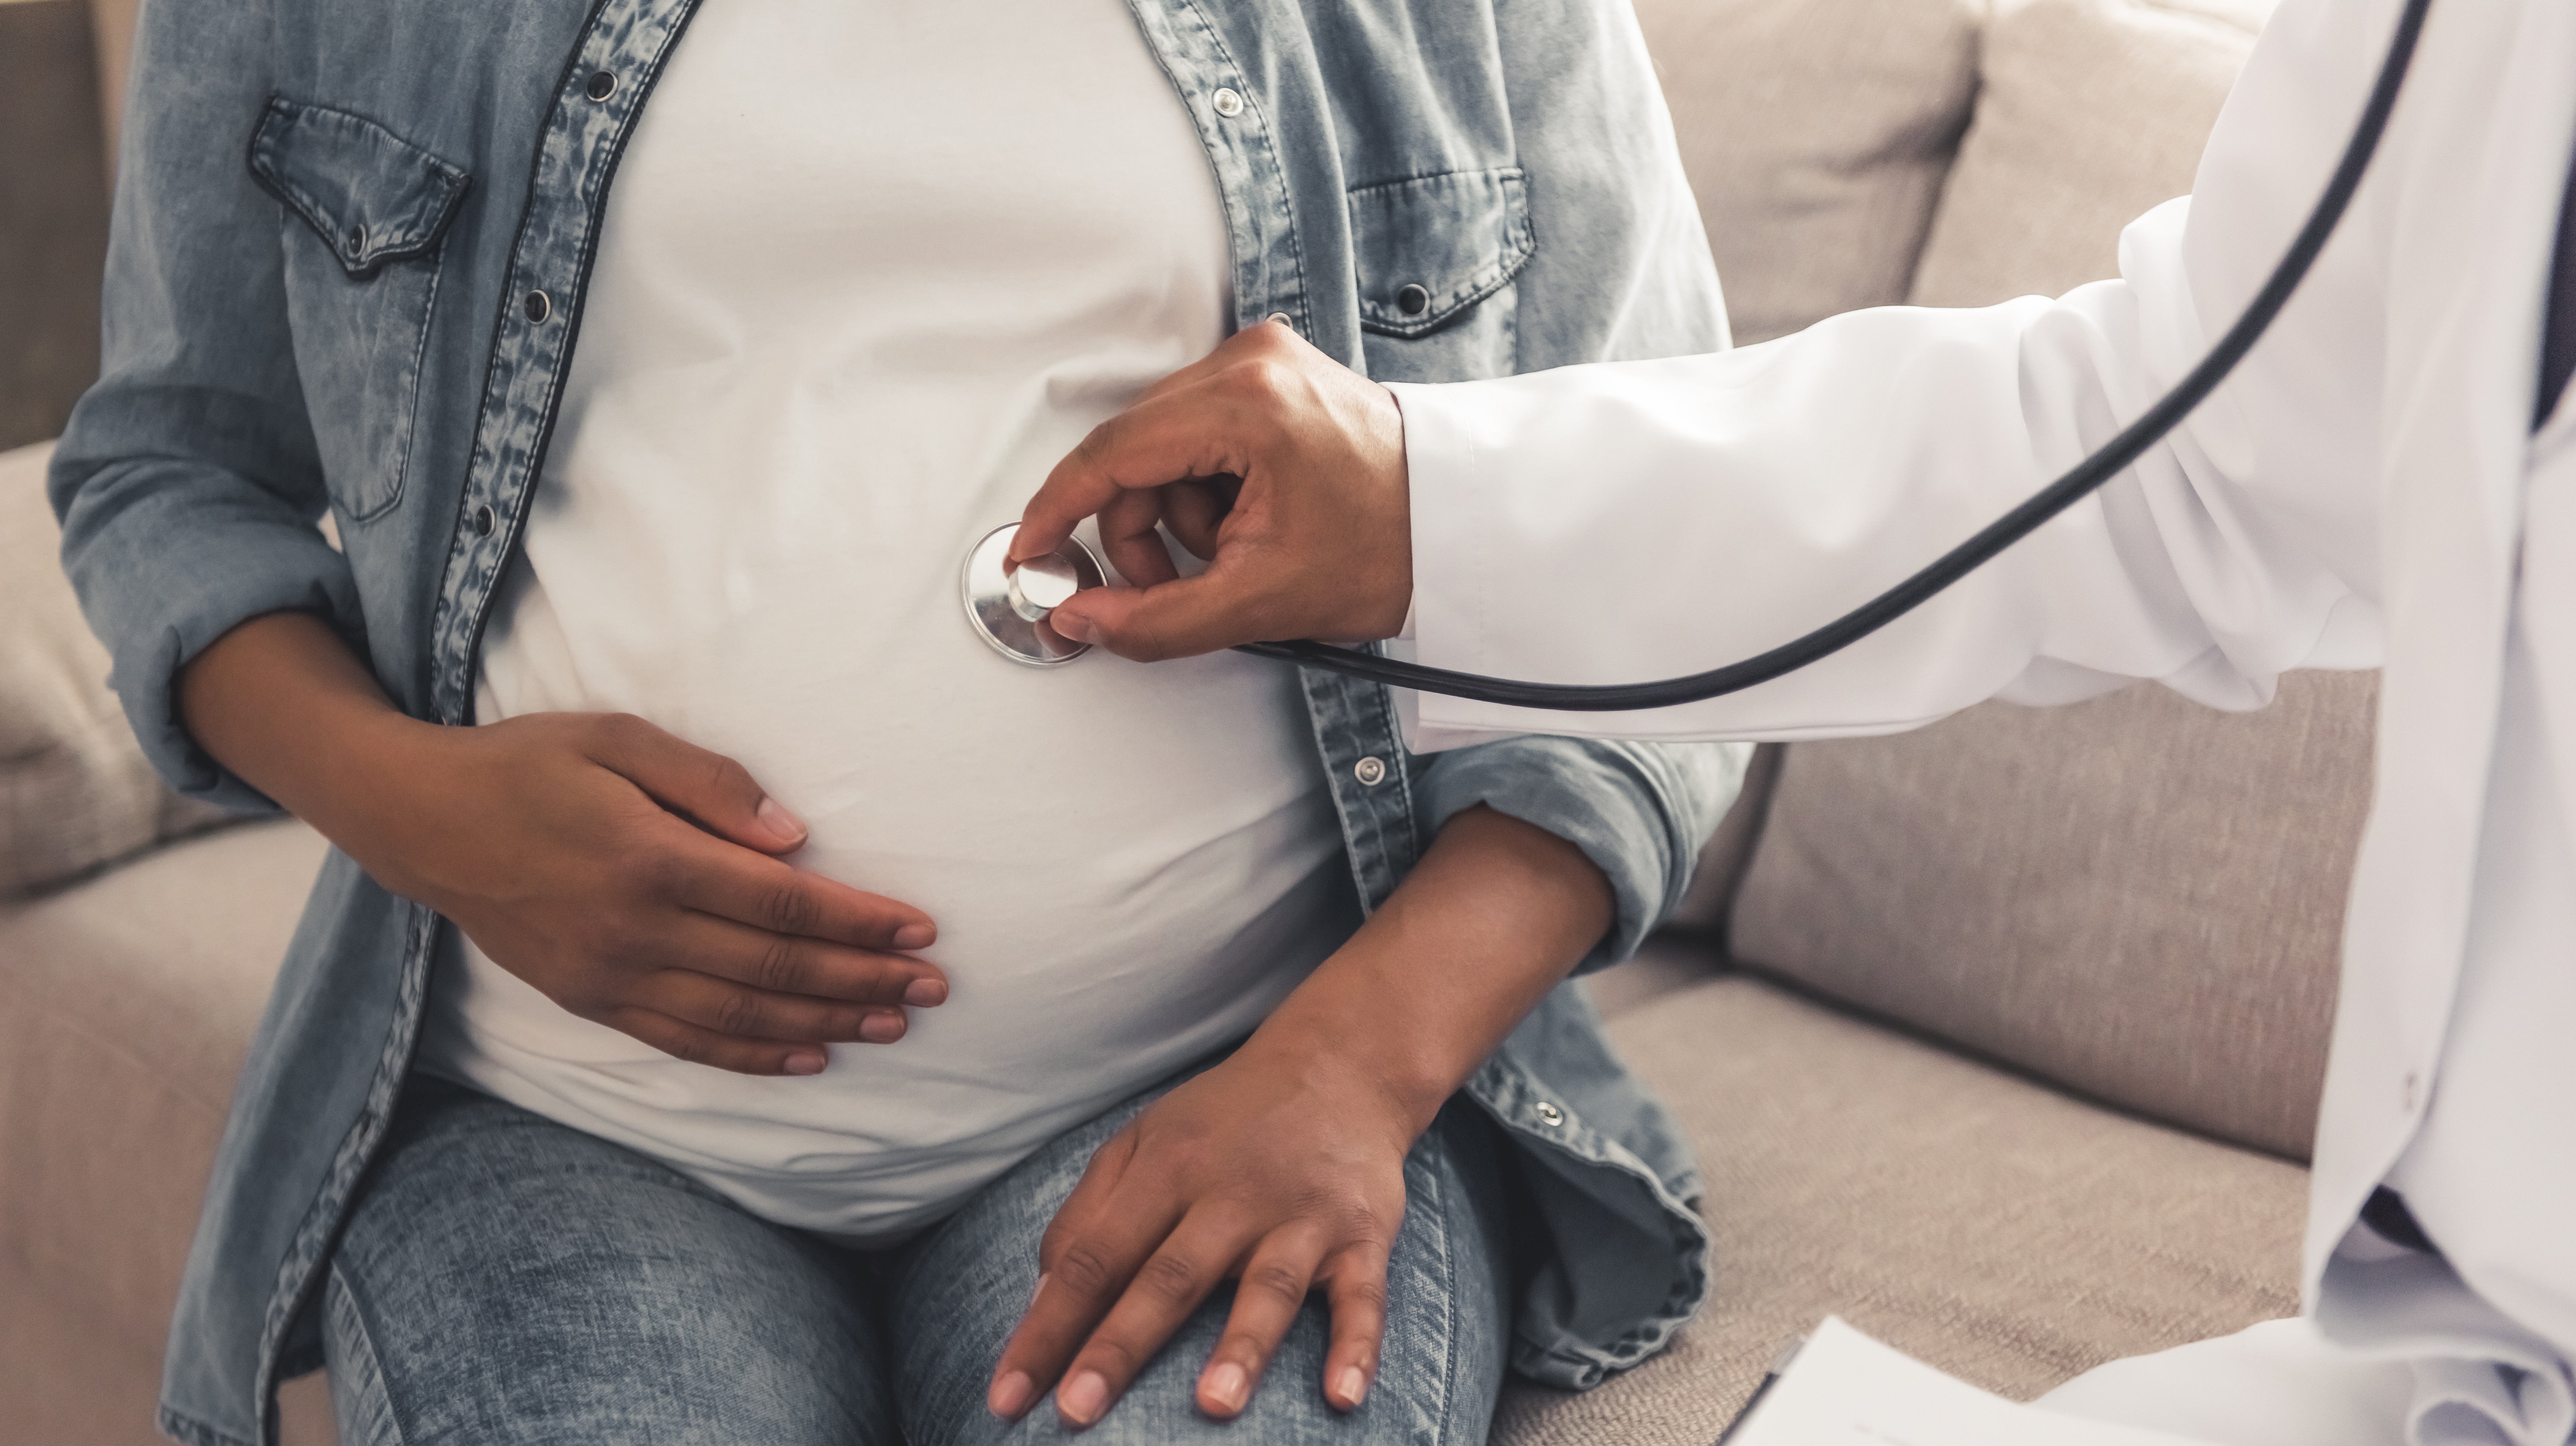 If You’re Pregnant, Here’s What You Need To Know About The Coronavirus